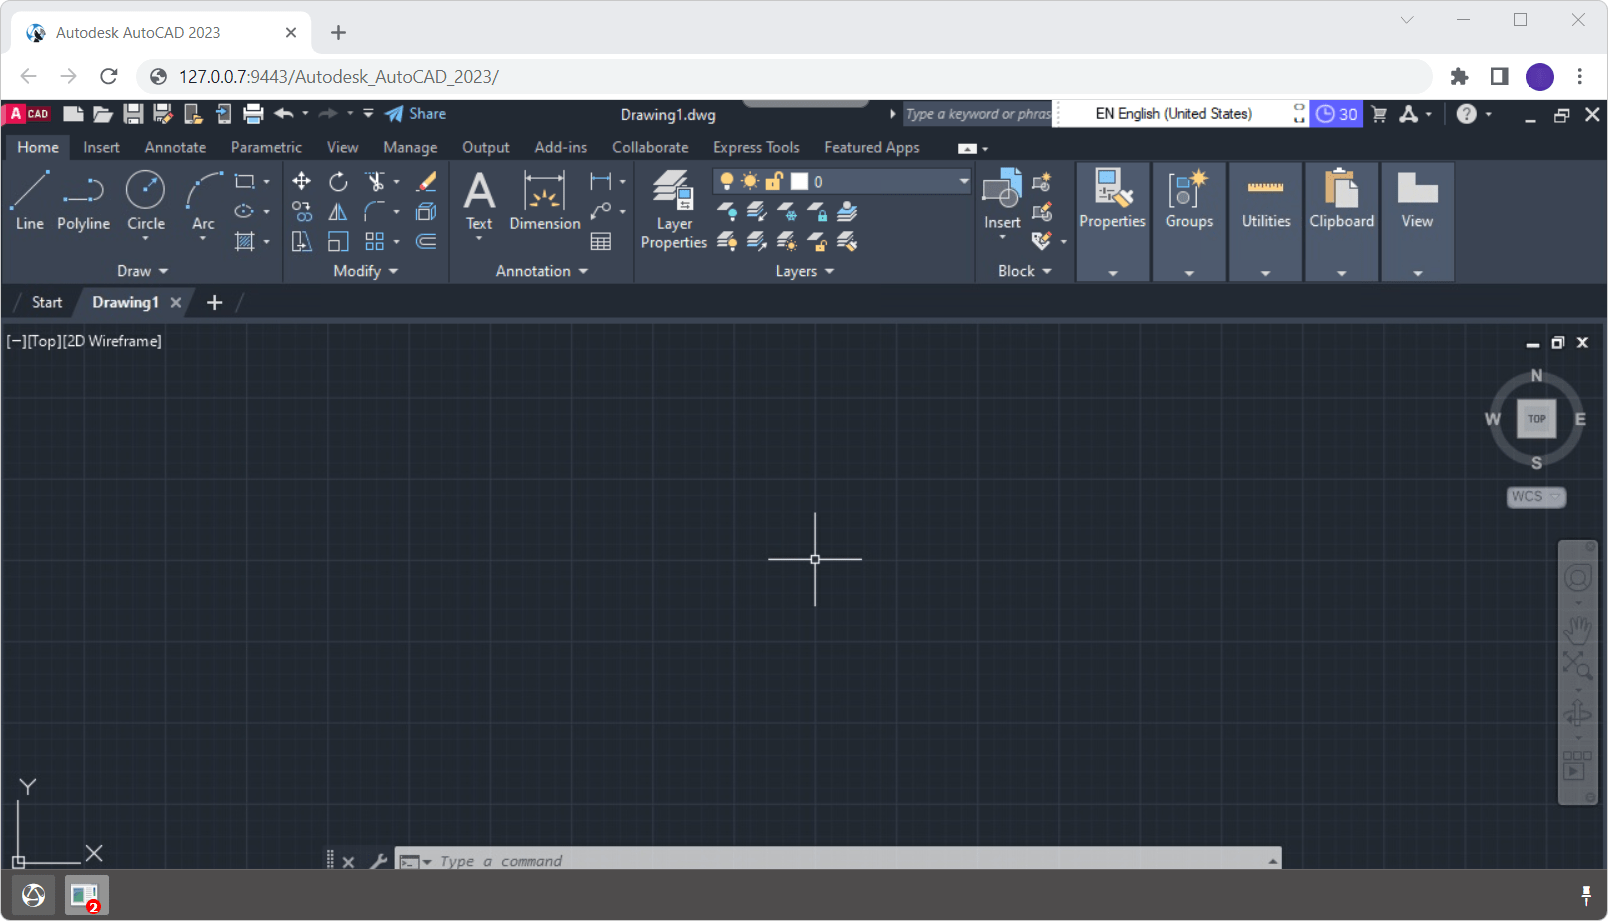 Web AutoCAD with Thinfinity Remote Workspace 6